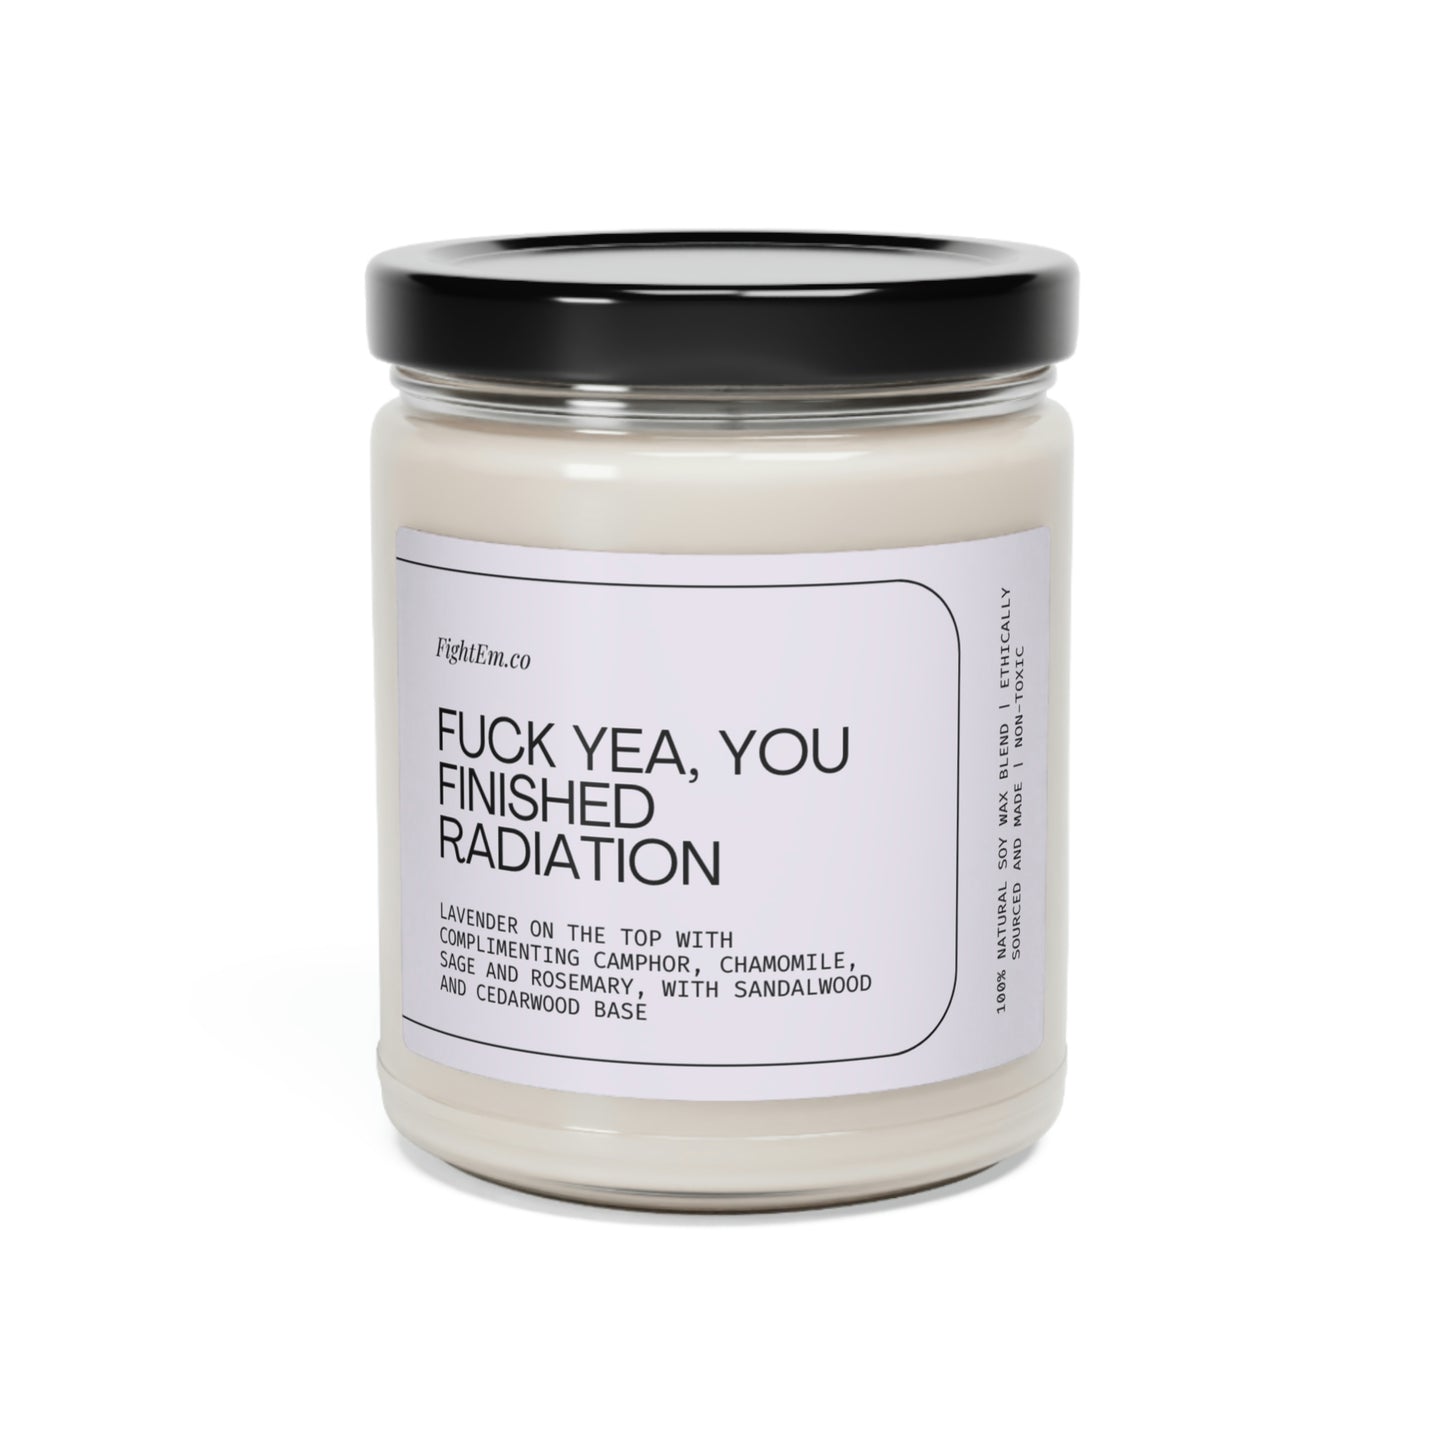 F*ck Yea, You Finished Radiation Scented Soy Candle 9oz 100% Natural Soy Wax Blend